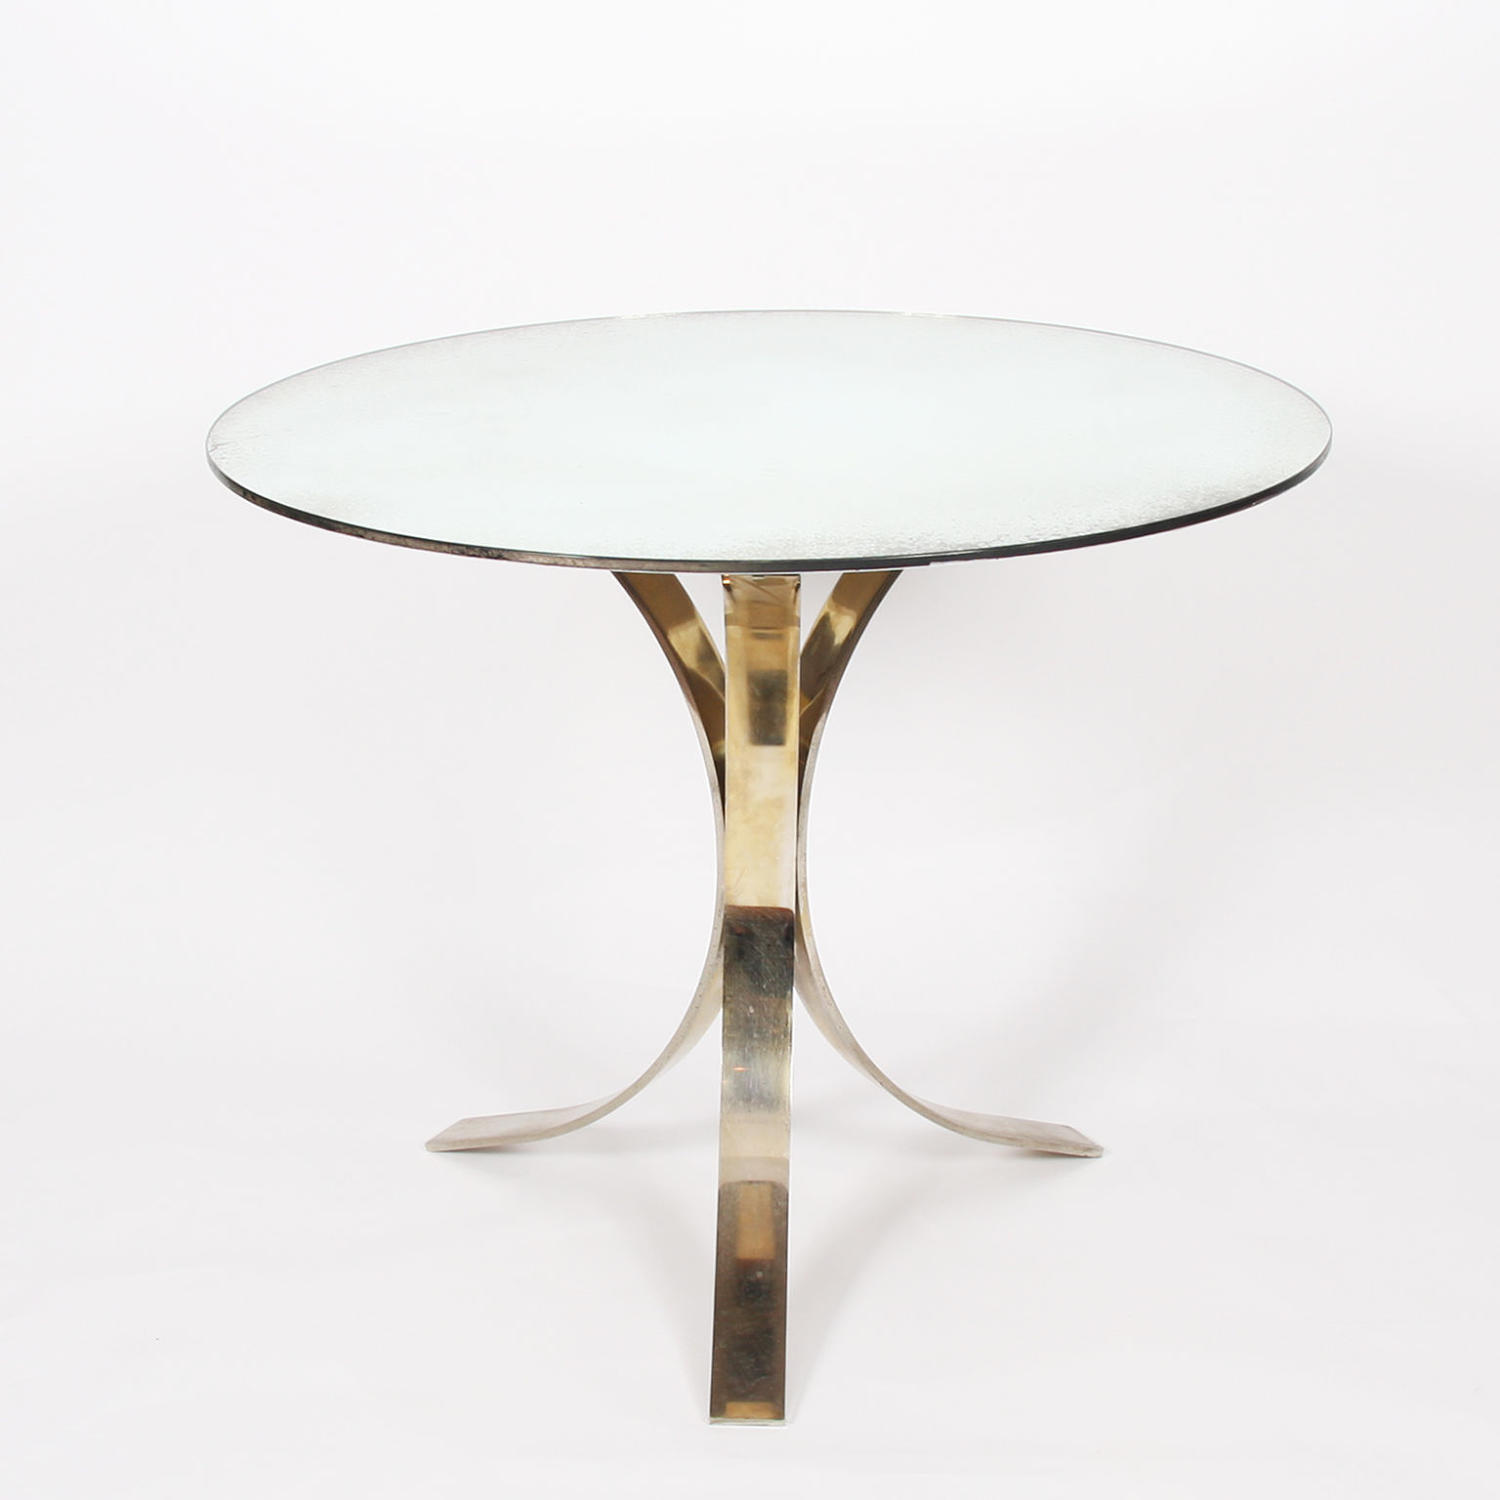 Round Mirrored Glass Centre Table